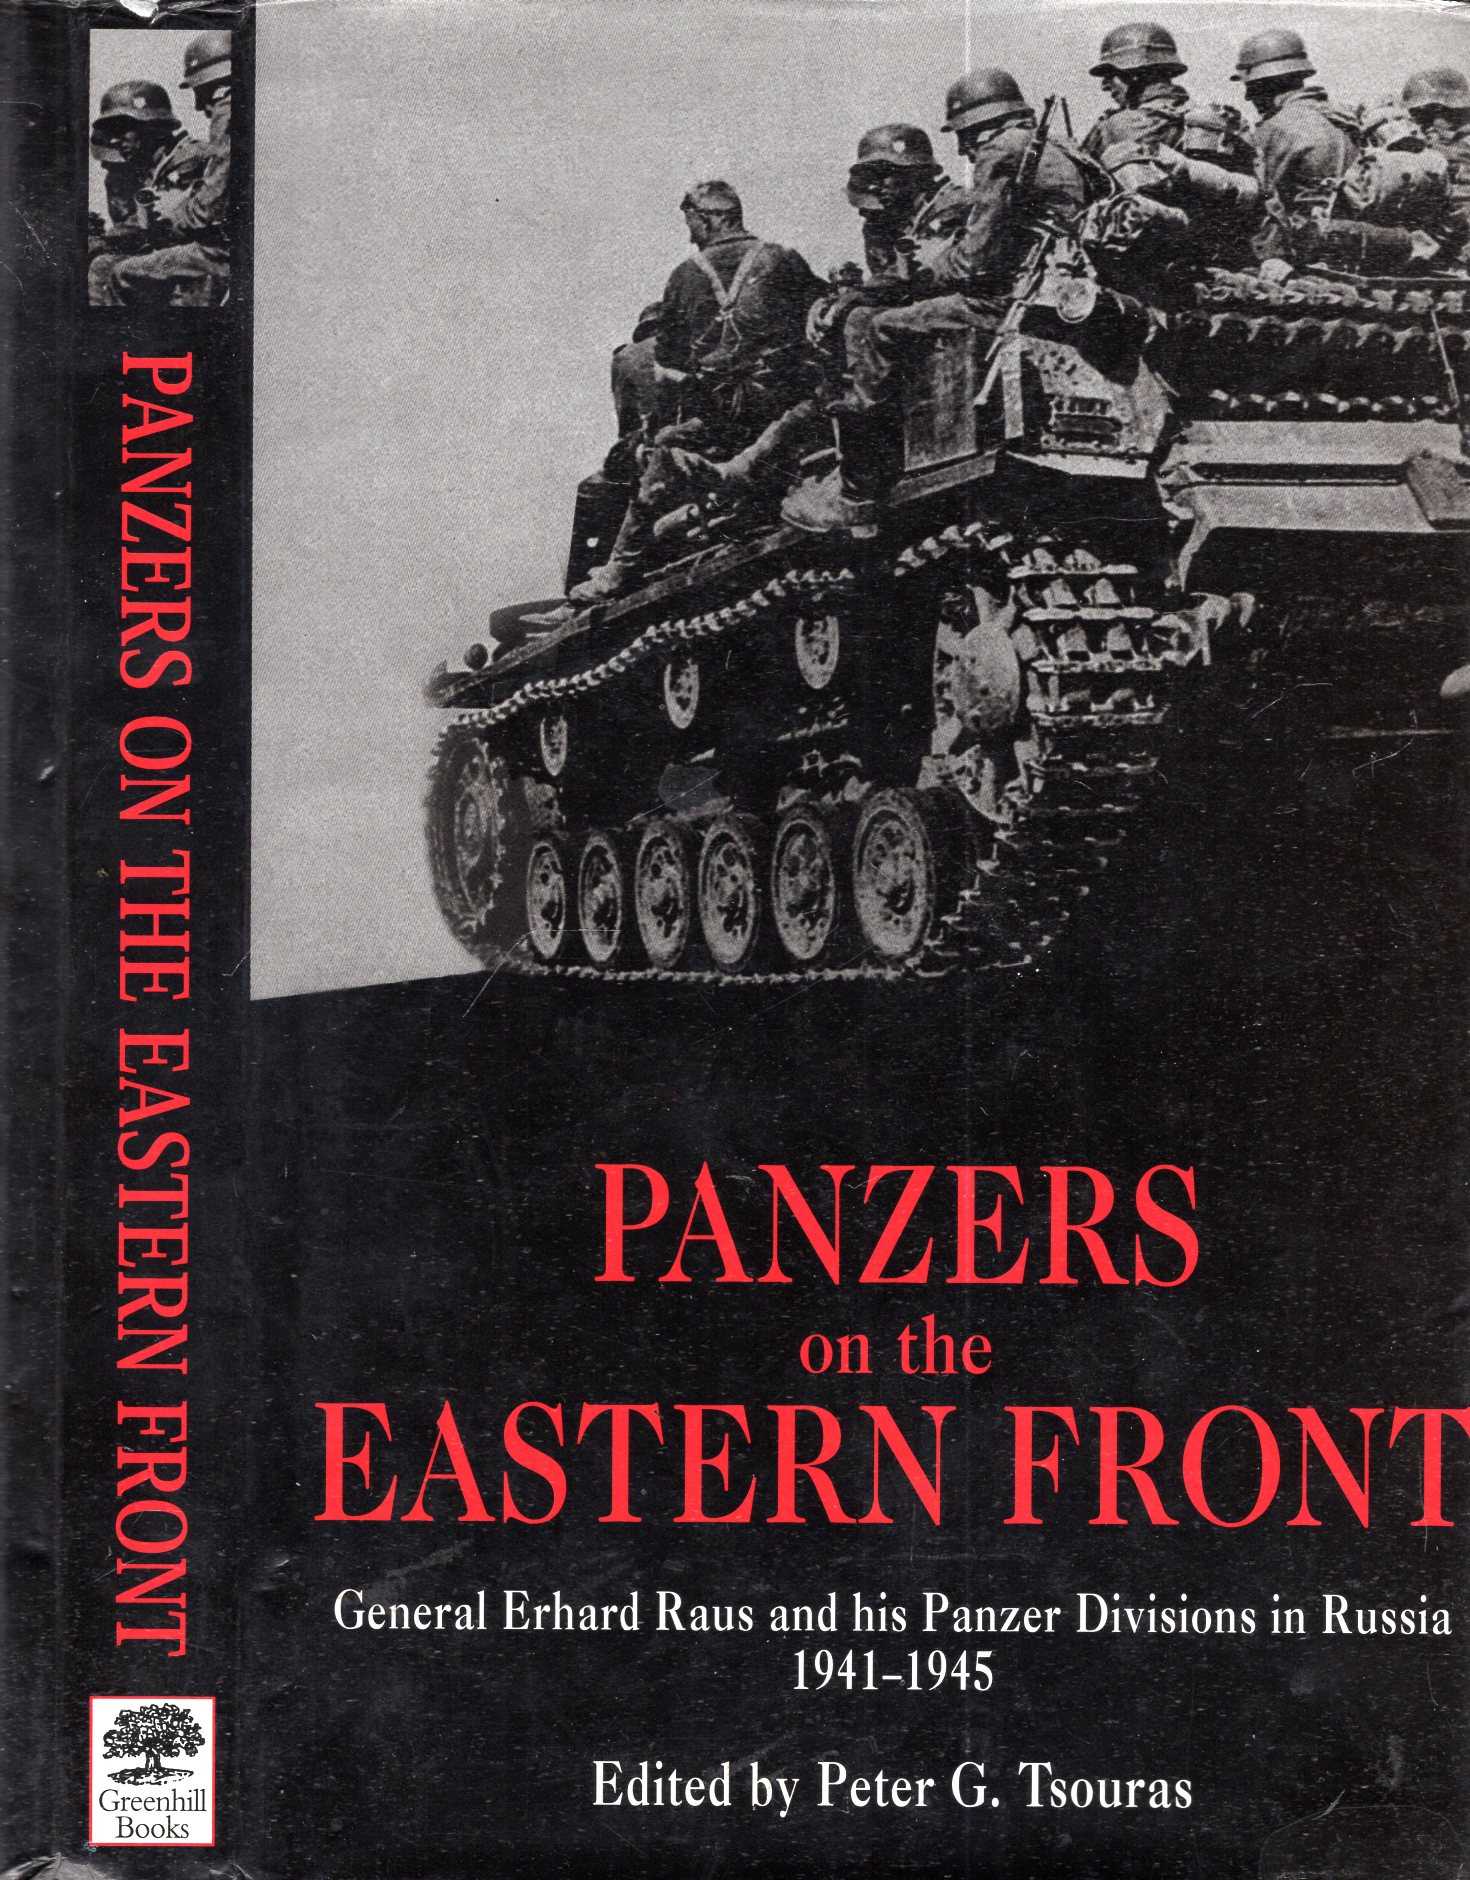 Panzers on the Eastern Front: General Erhard Raus and his Panzer ...